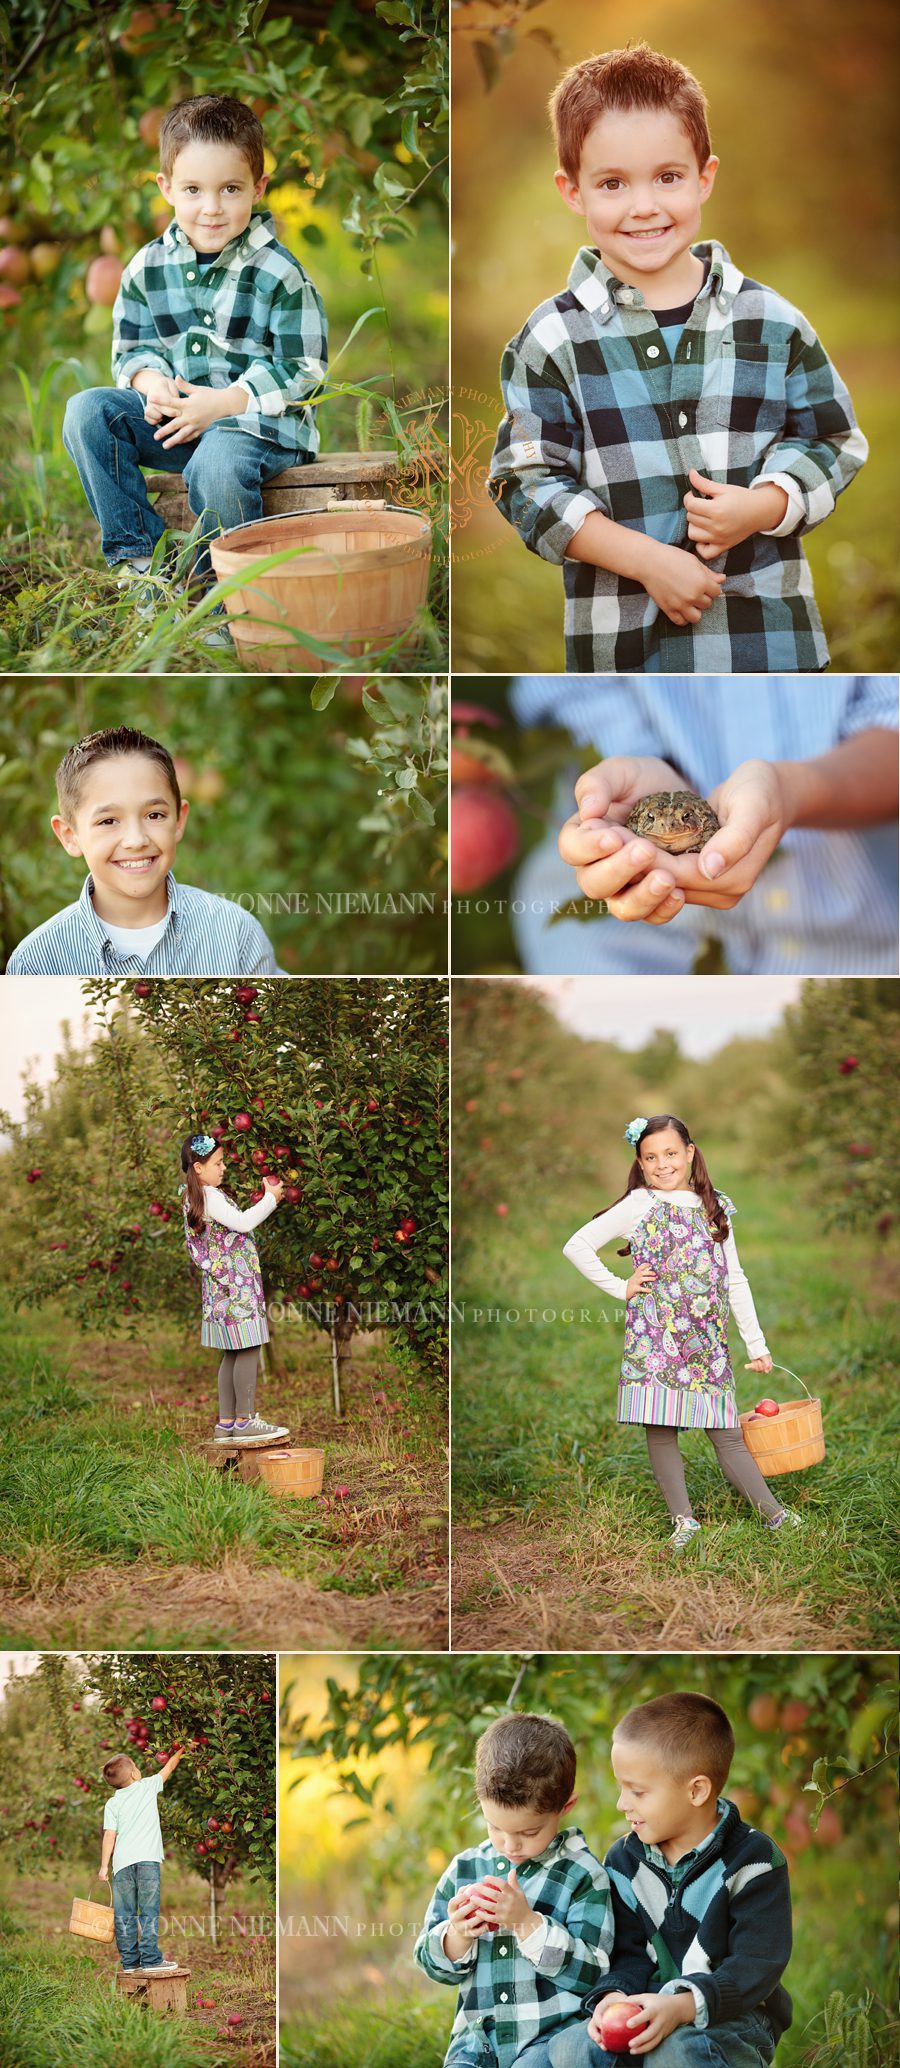 Portraits of four siblings at apple orchard taken by Yvonne Niemann Photography.